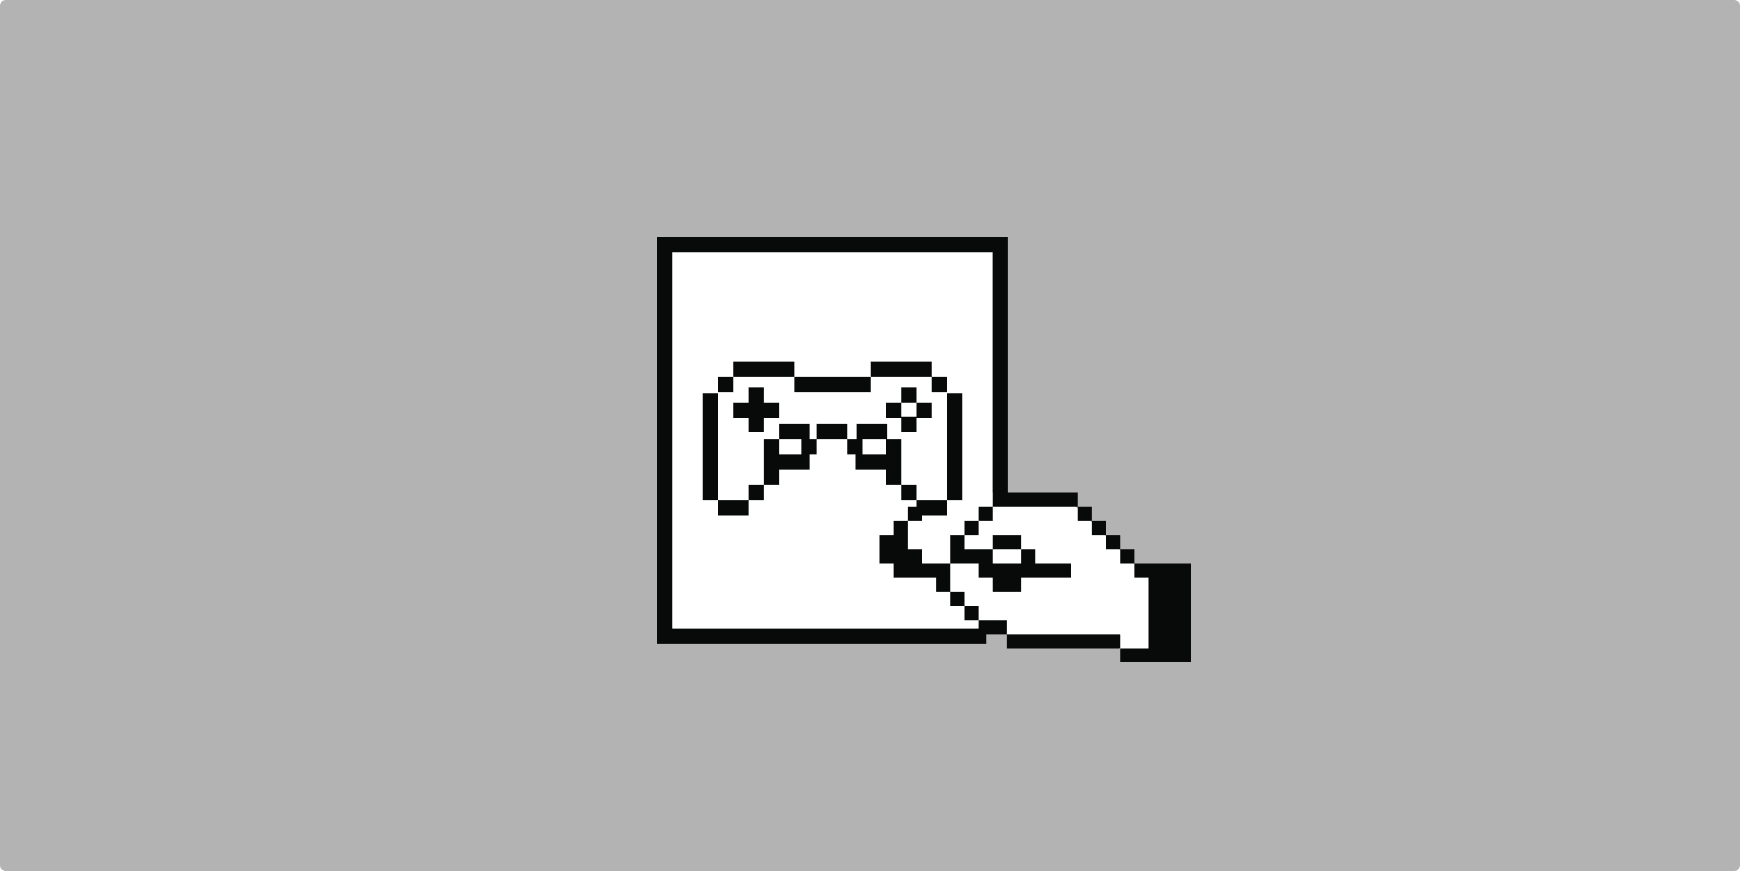 A pixel art, similar to Macintosh II graphics. A hand holding a brush drawing a gamepad on a canvas.